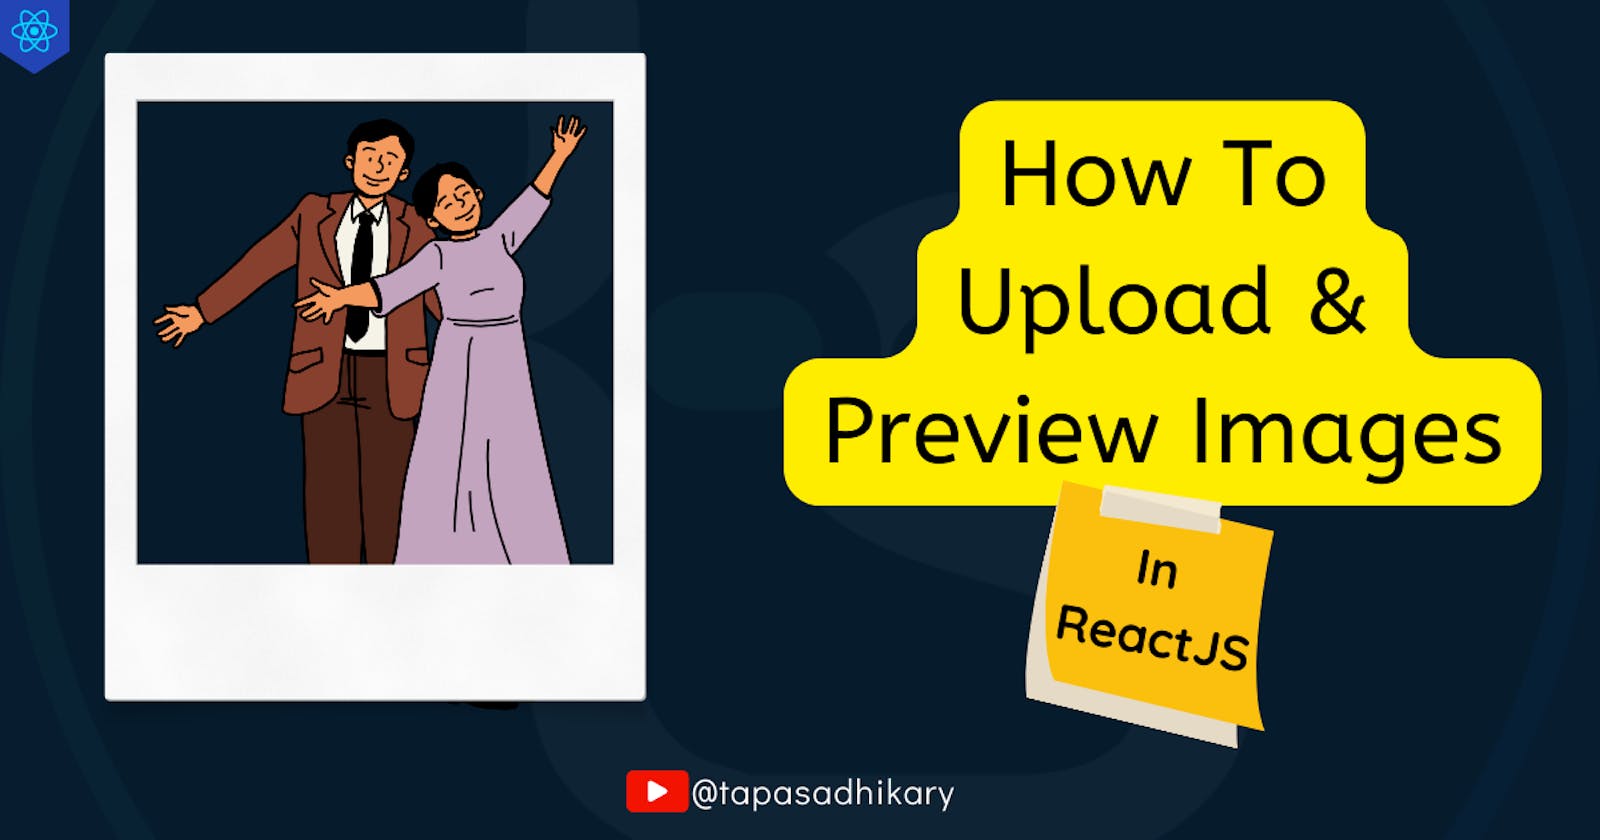 How to upload and preview images in ReactJS?